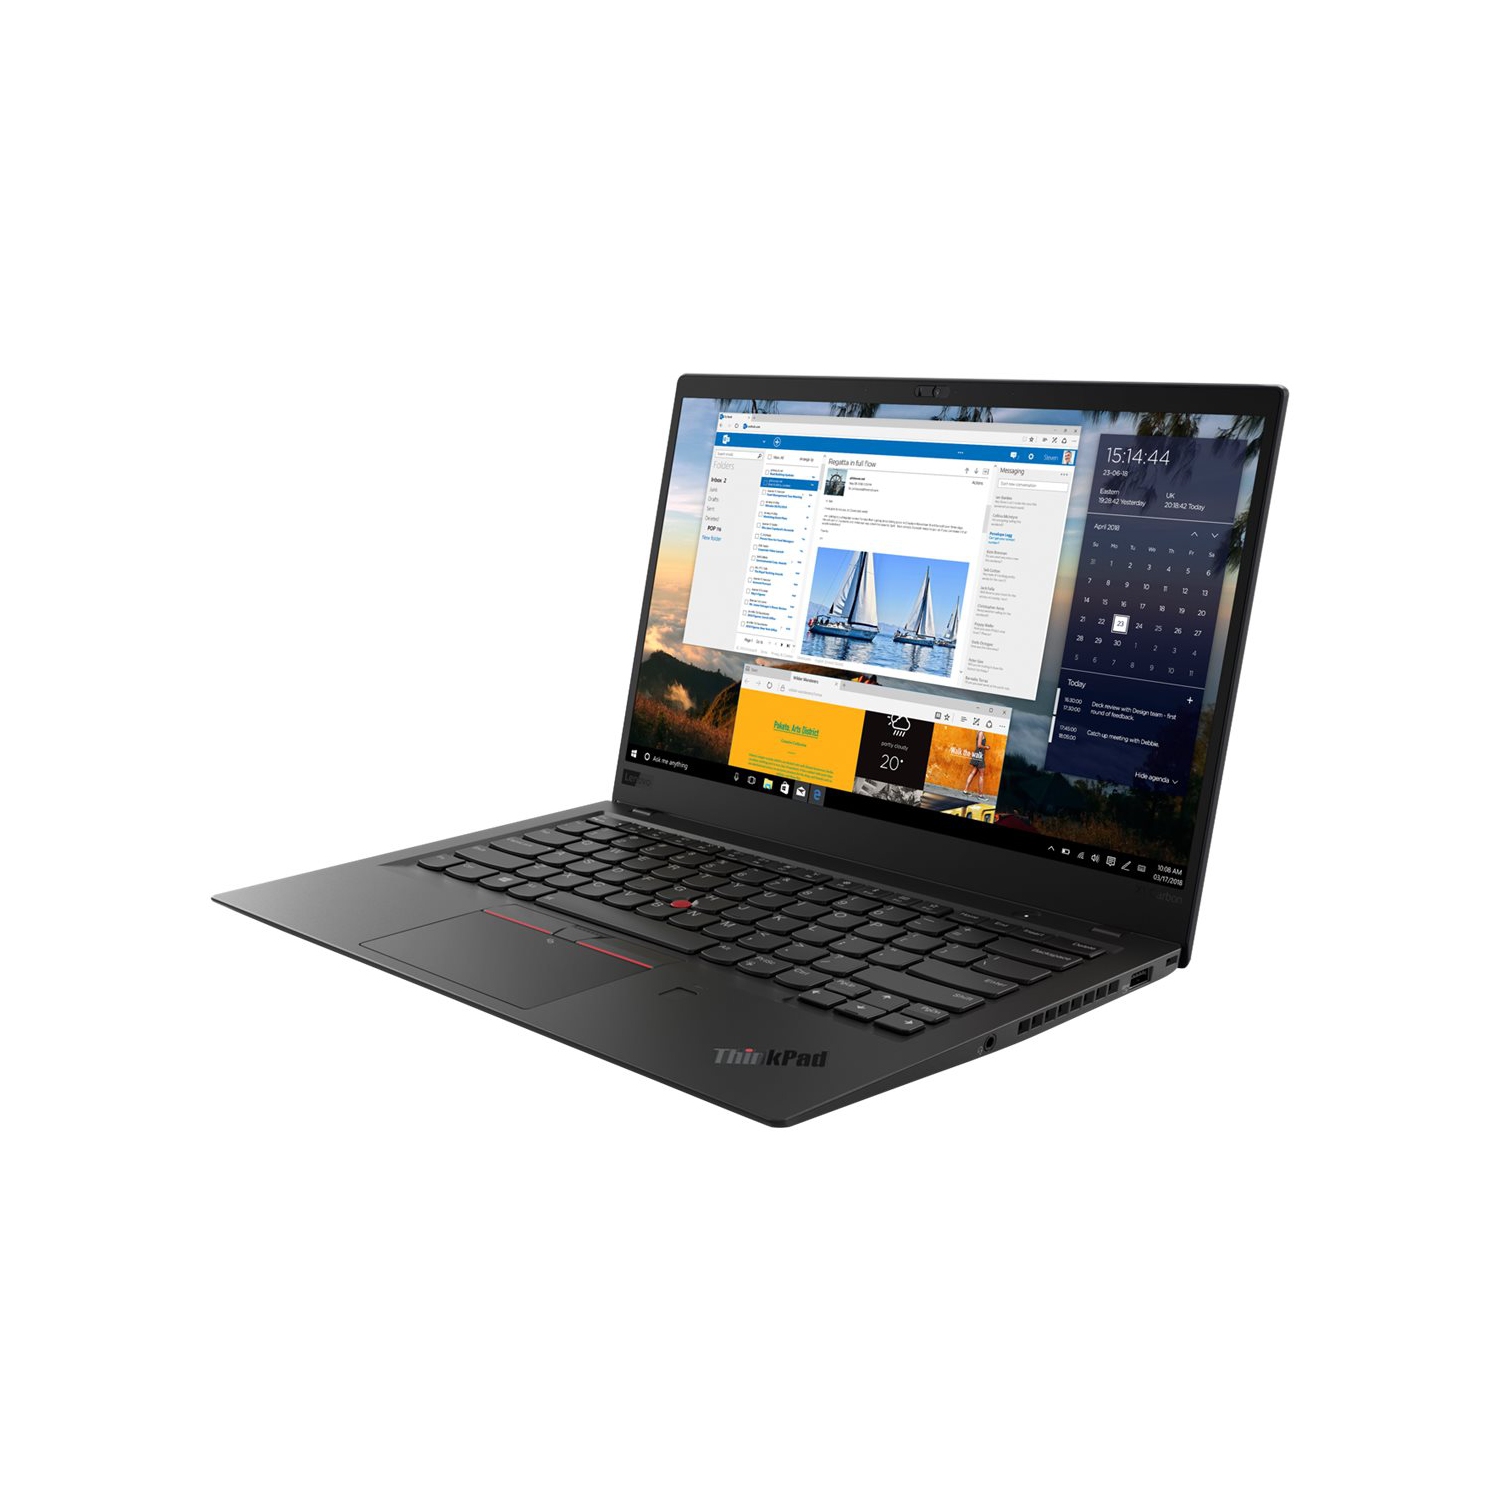 Refurbished (Good )-Lenovo ThinkPad X1 Carbon G7 TOUCH SCREEN-14" Laptop, 8th gen Core i7-8650U,16 GB, 1 TB SSD, Windows 10 Pro & 11 ready. Grade A & Excellent Condition